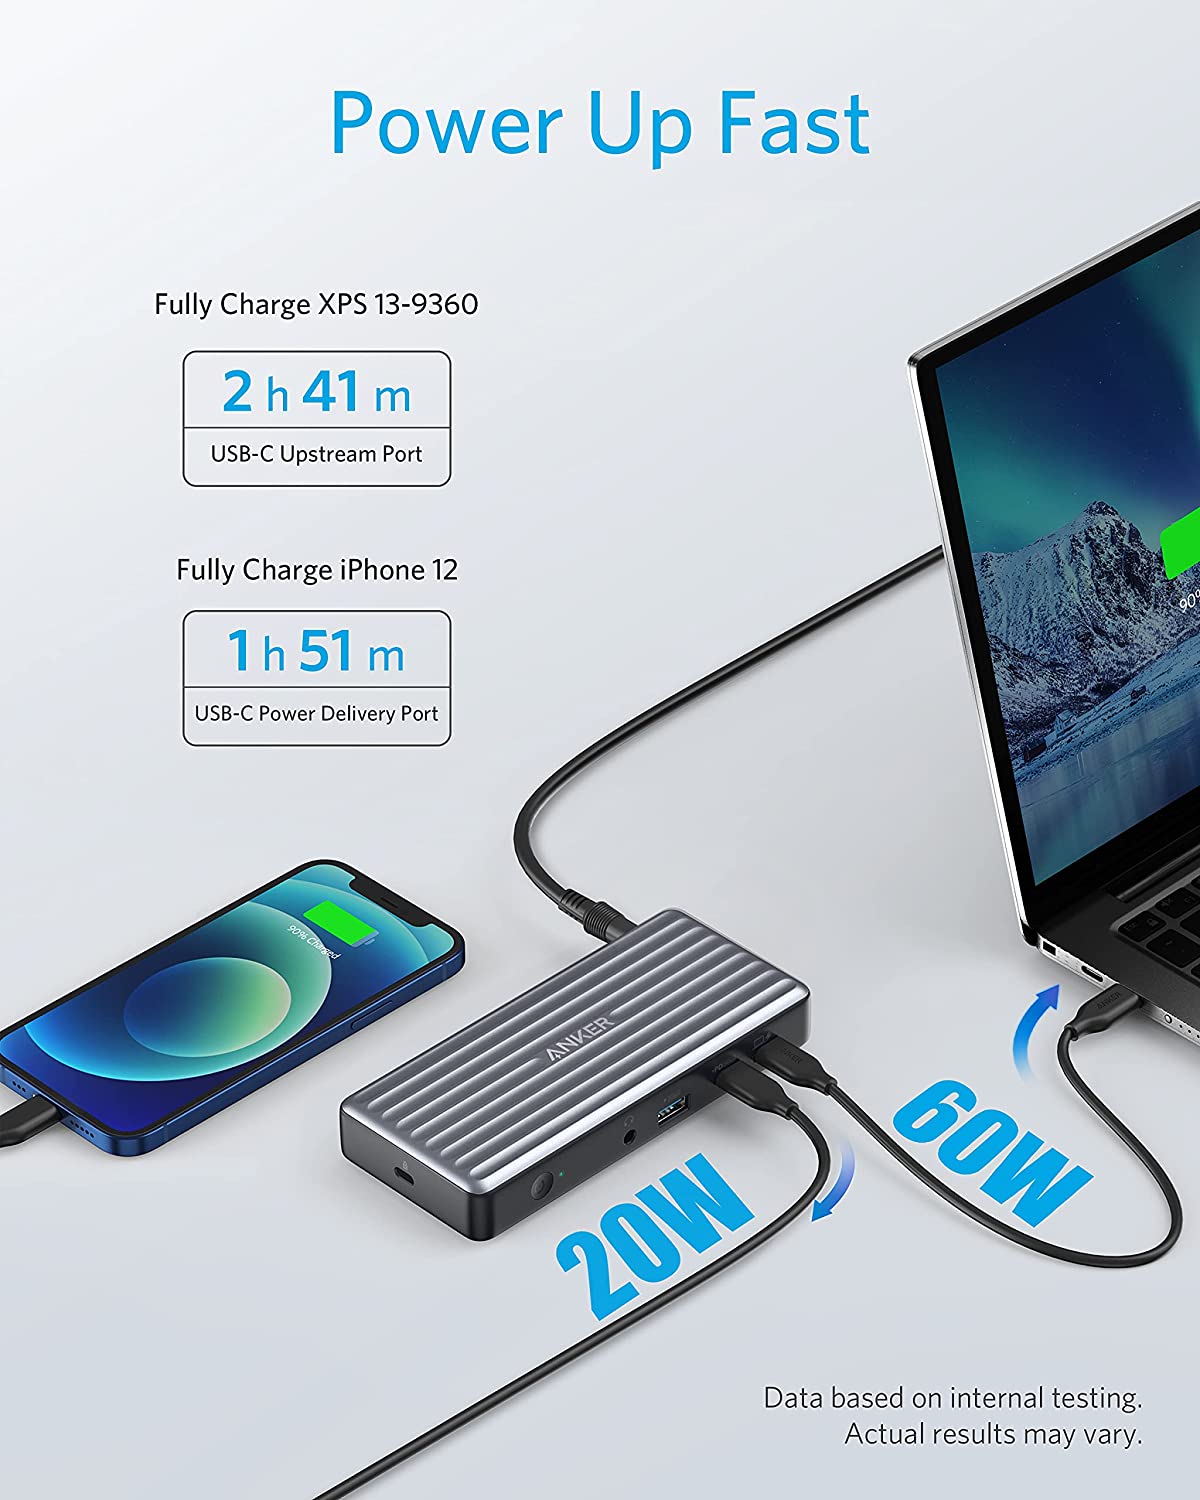 Anker USB C Docking Station PowerExpand 9-in-1